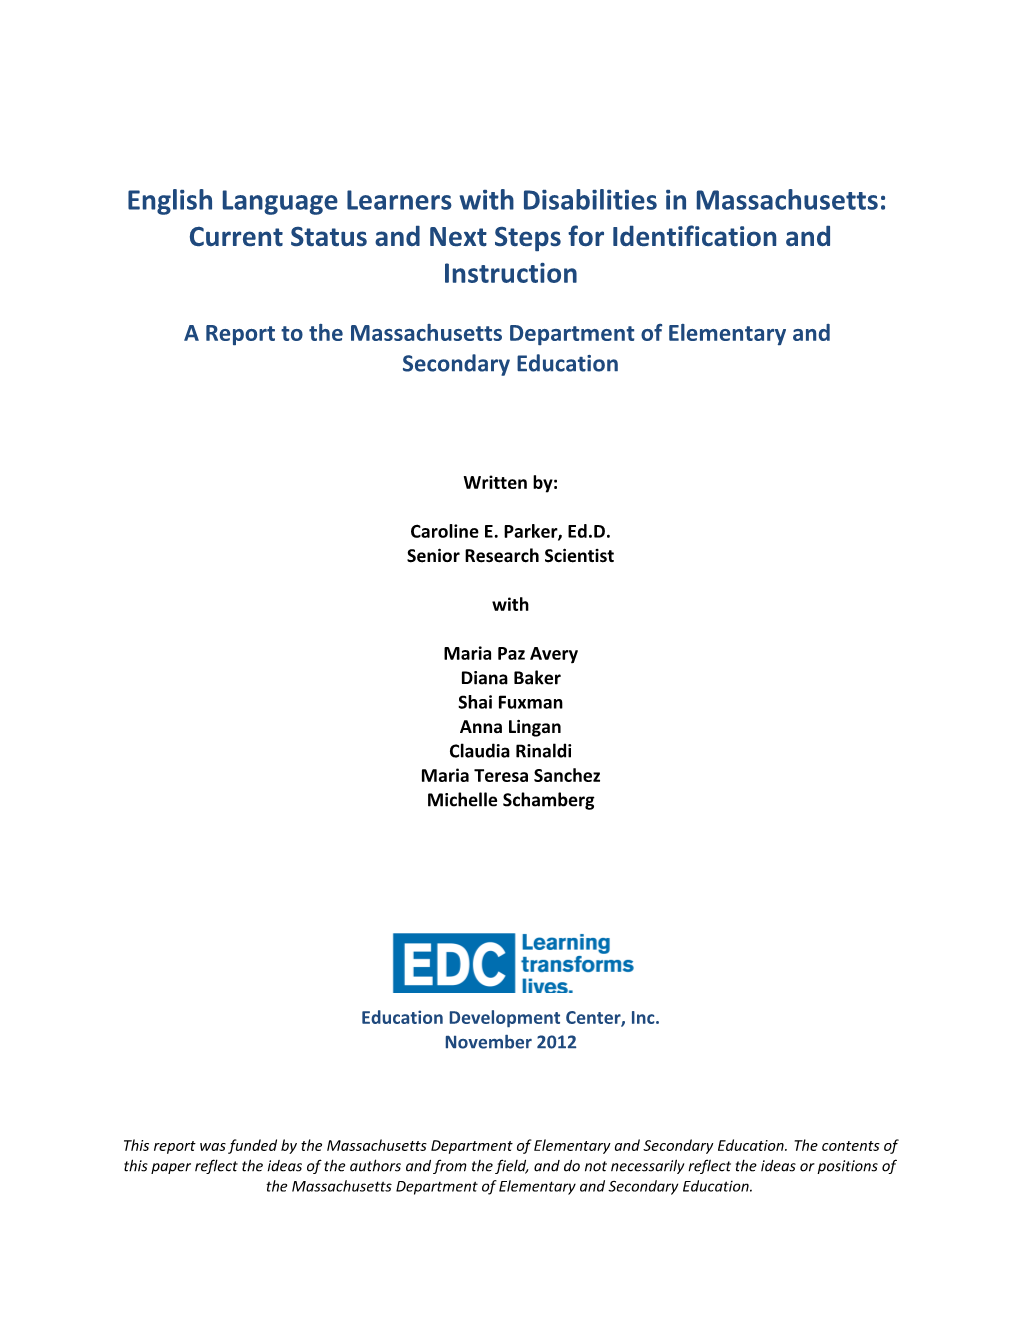 English Language Learners With Disabilities In Massachusetts: Current Status And Next Steps For Identification And Instruction